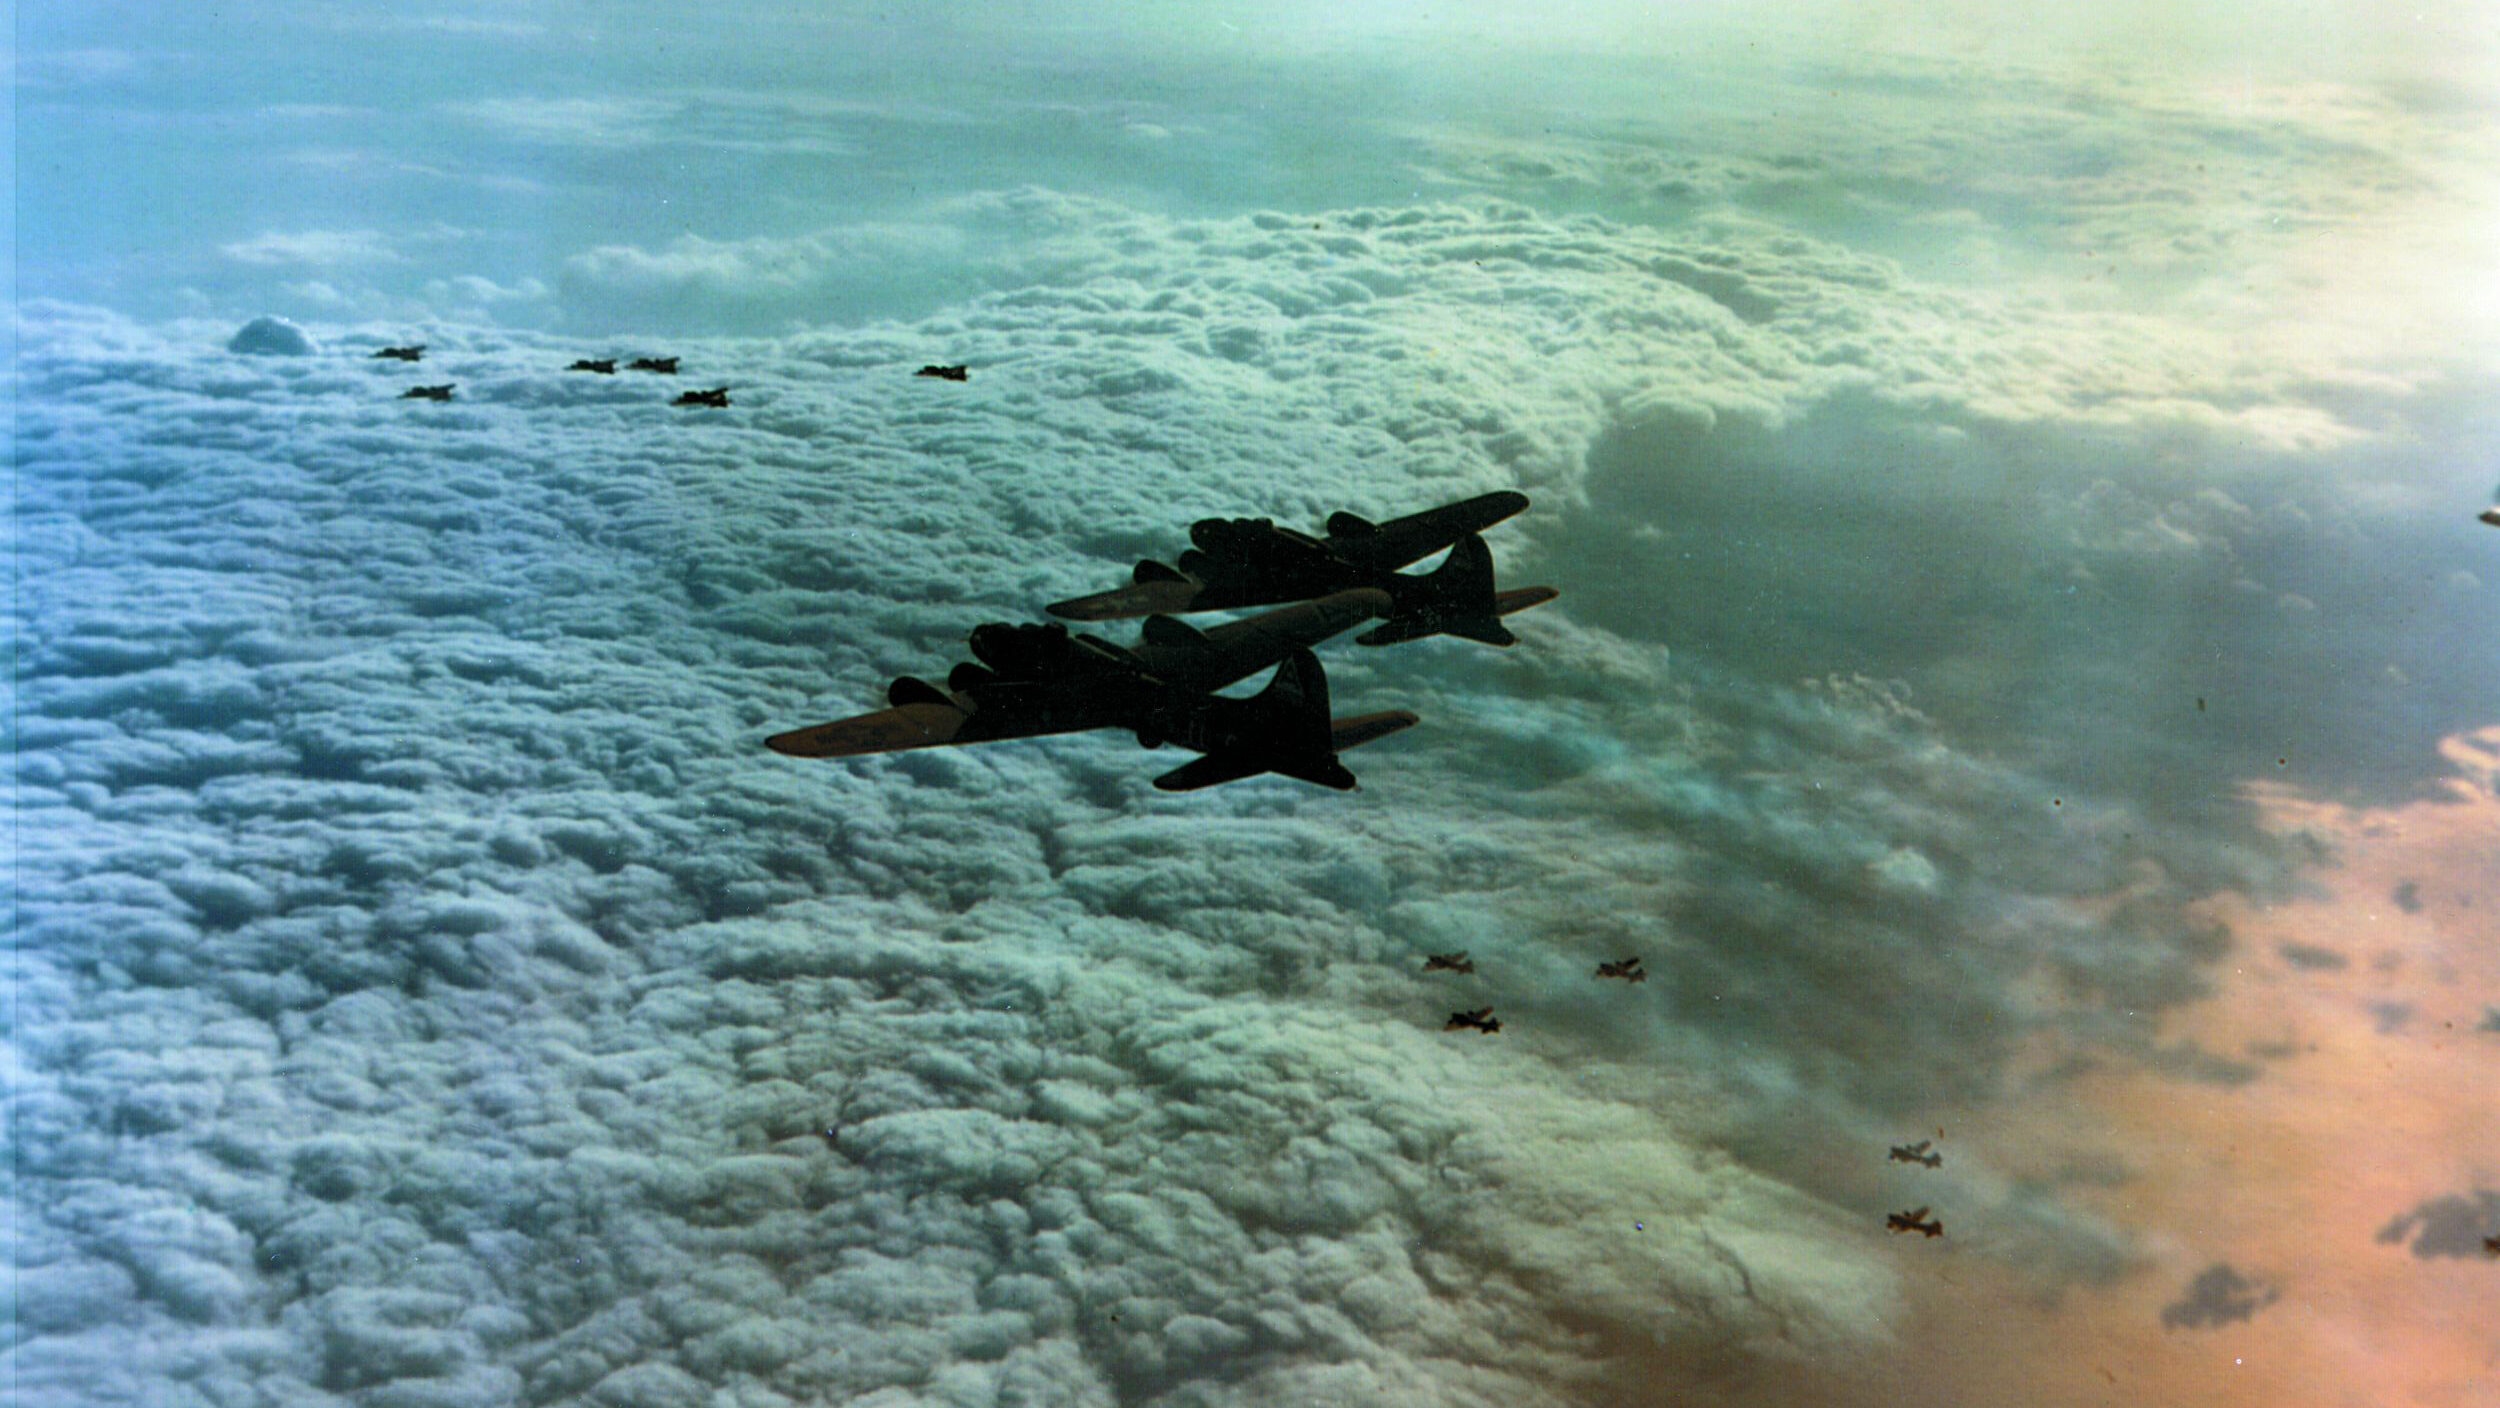 Flying high above sun-tinged clouds, a formation of Boeing B-17 Flying Fortresses streaks away from a target in Germany after dropping its cargo of destruction. The U.S. Eighth Air Force bombed German cities by day, while the British Royal Air Force kept up the round-the-clock air offensive at night.